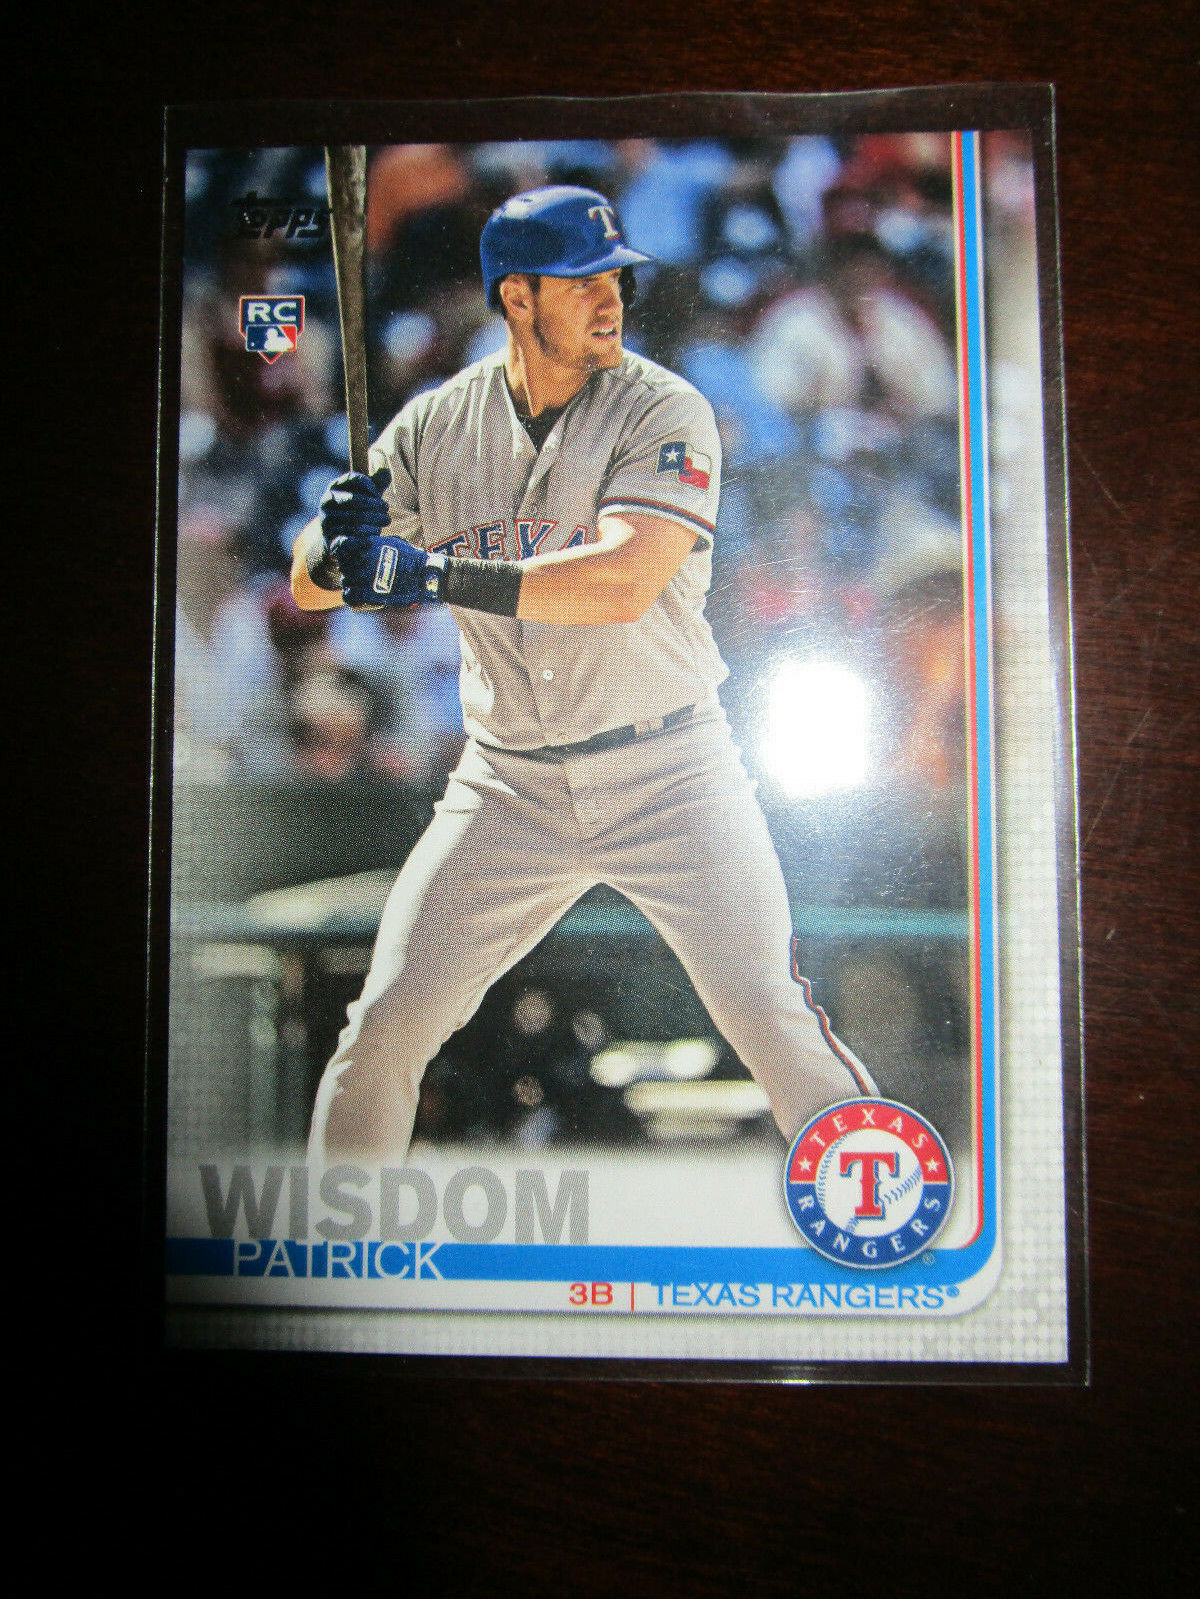 Patrick Wisdom 2019 Topps (Rookie Card). rookie card picture